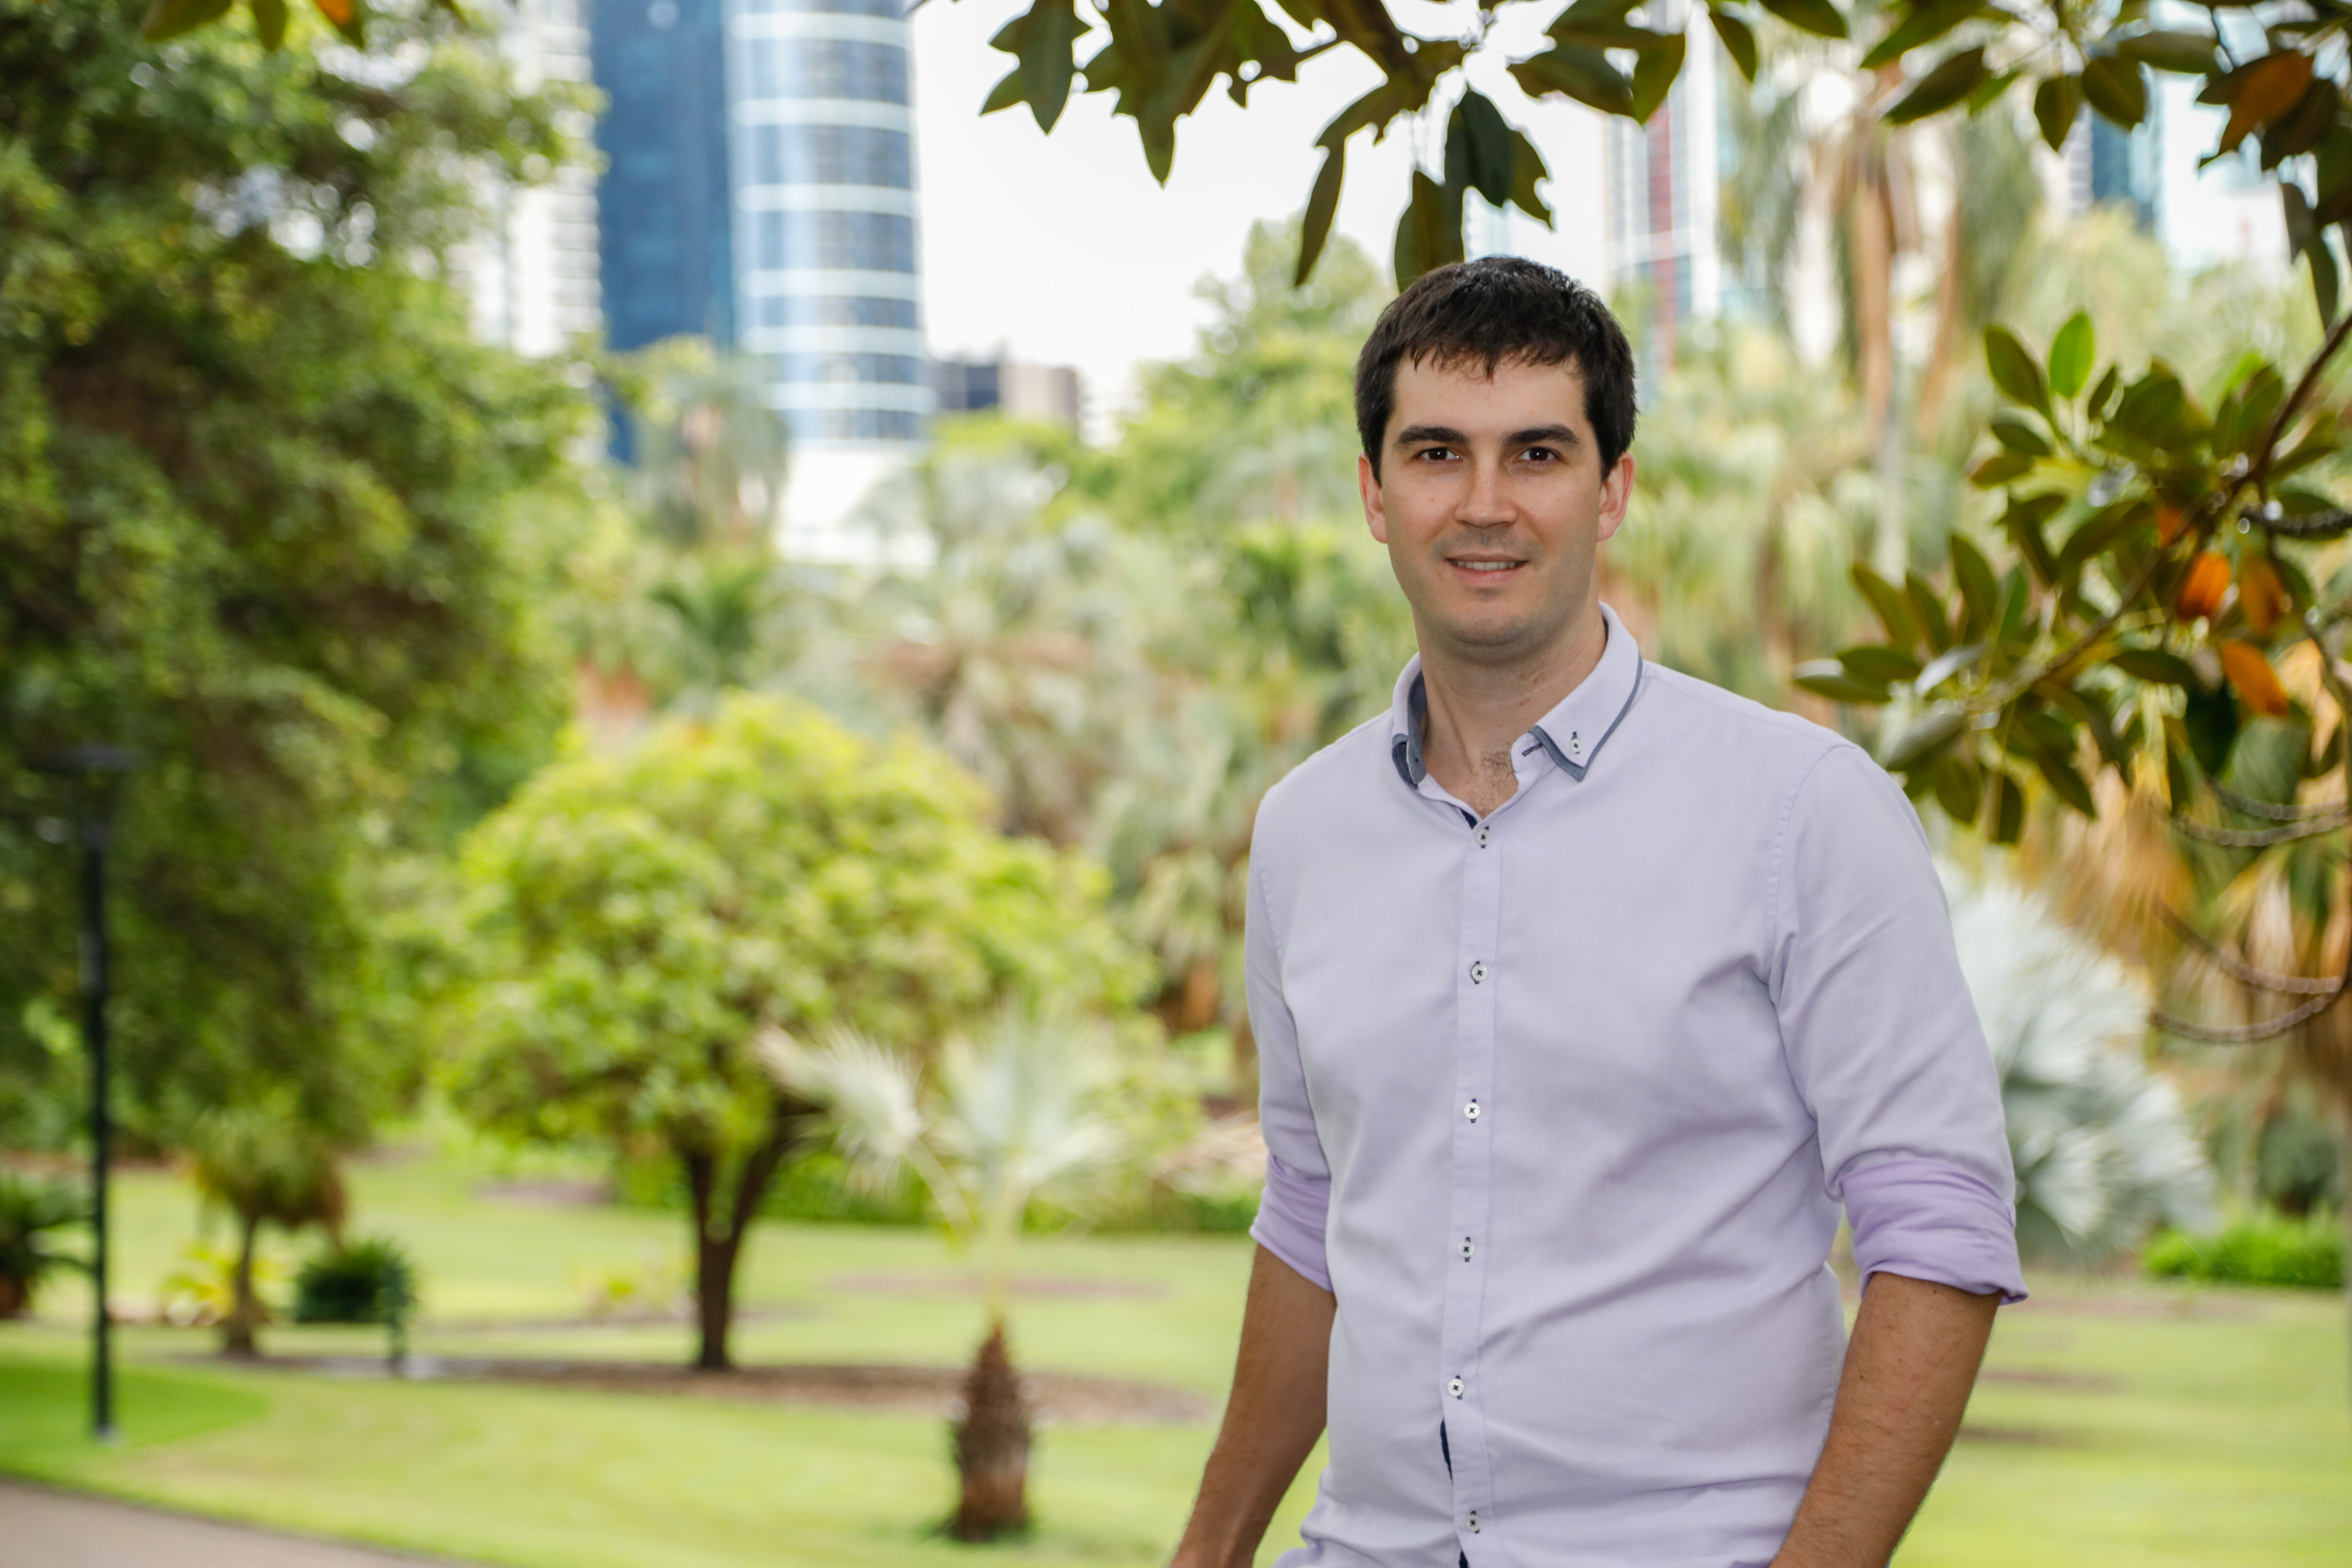 QUT-based robotics engineer Dr Chris Lehnert specialises in solving commercial automation challenges, developing novel solutions for an array of real-world applications. Right now, he's developing components for high-tech vertical farm modules in a CRC collaboration with Greenbio.